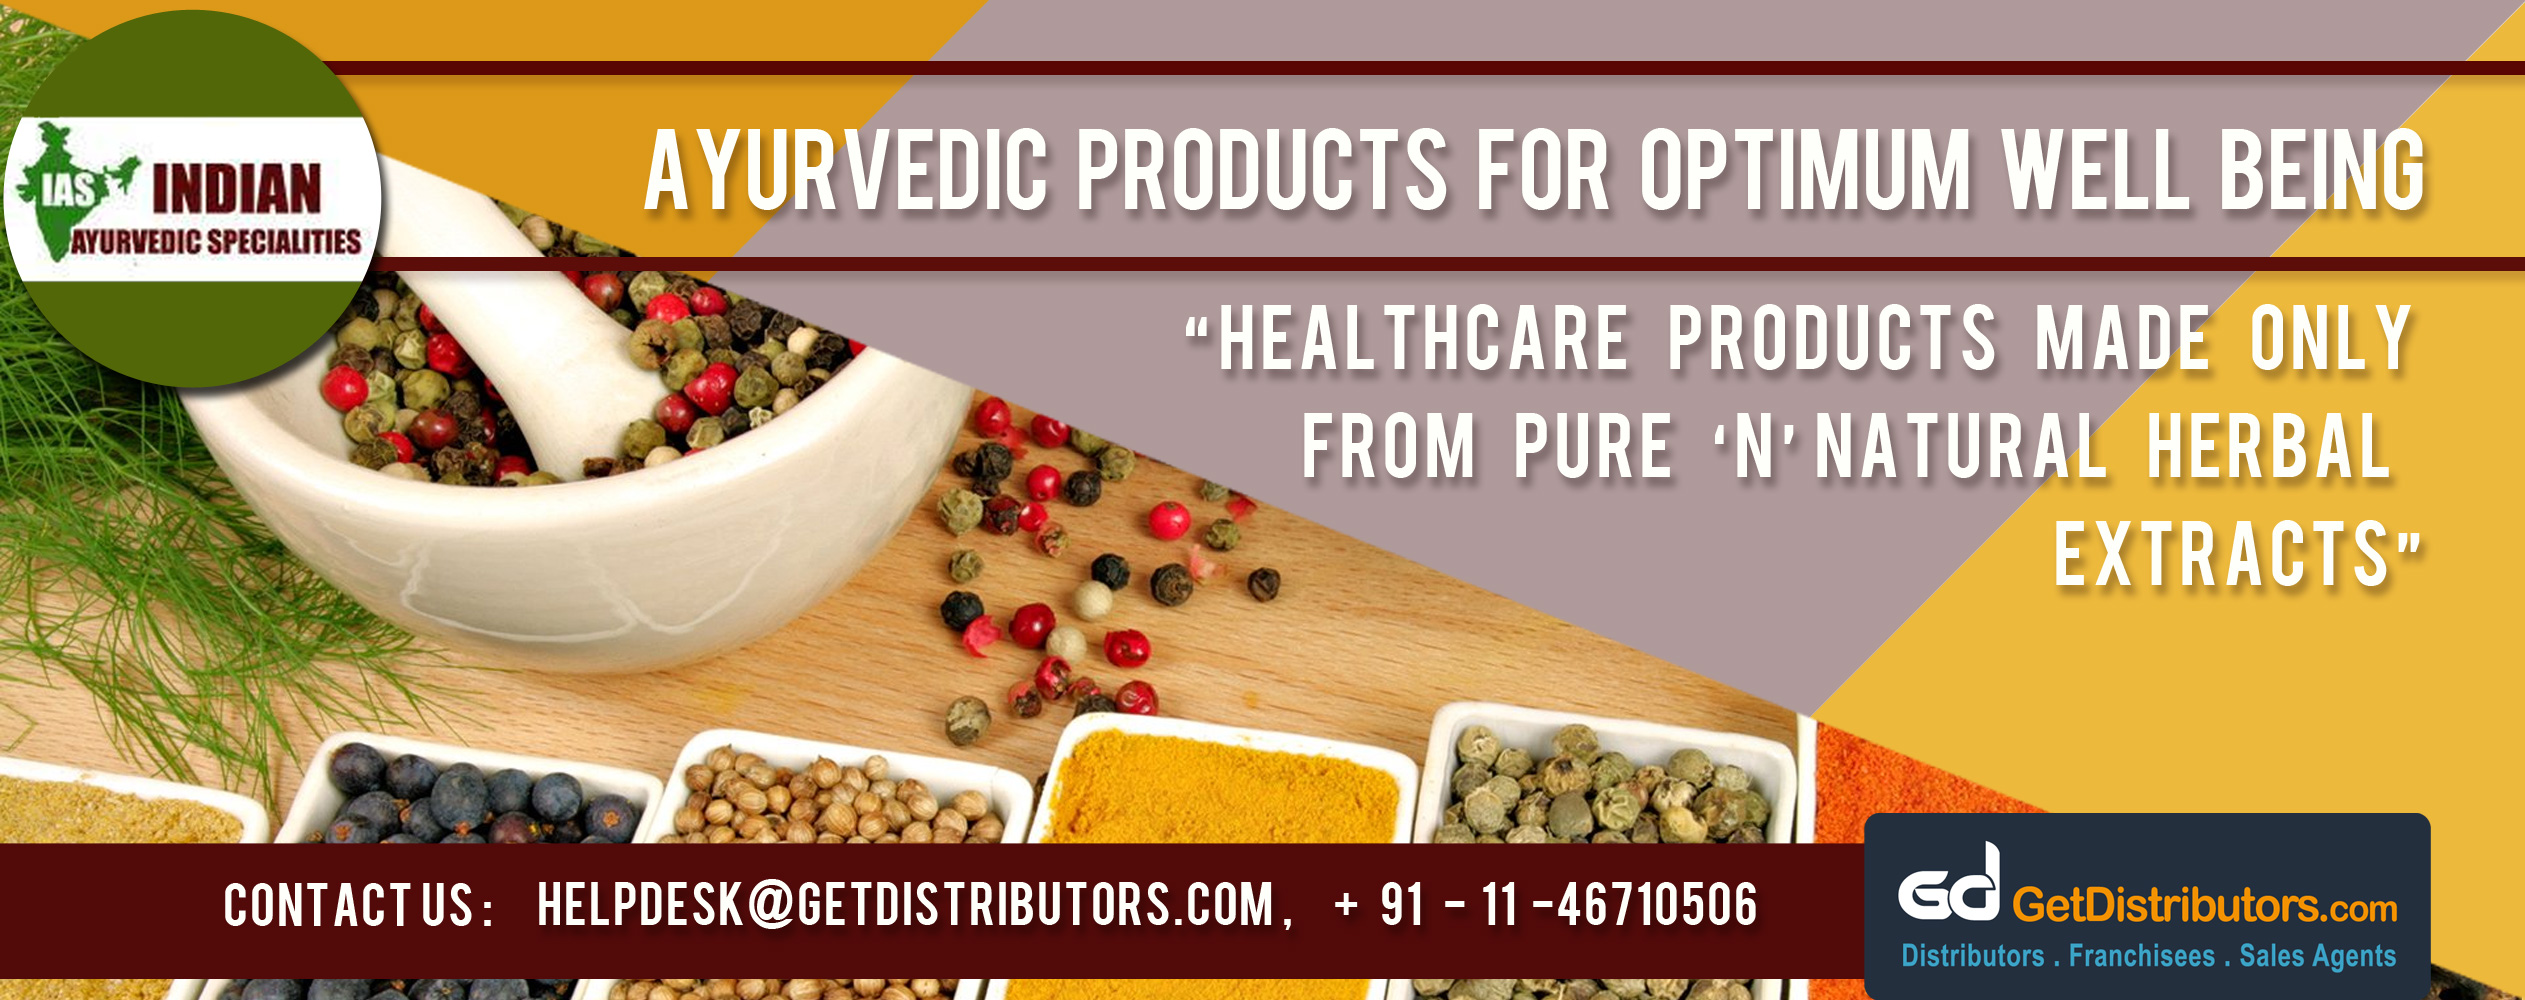 Ayurvedic Products for Optimum Well Being